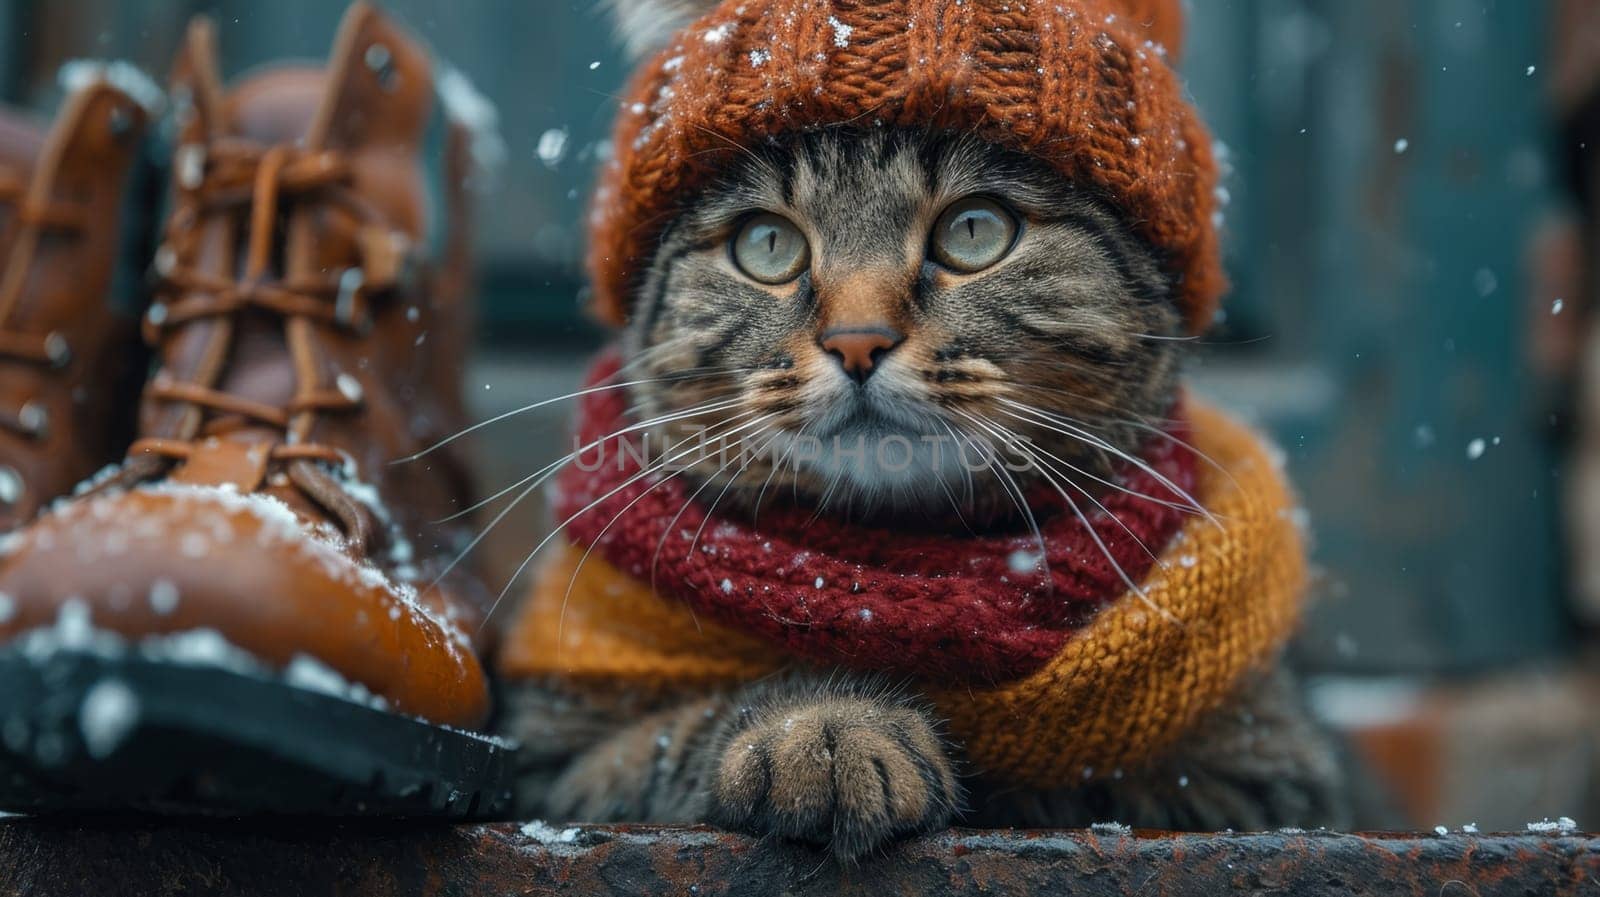 a cat in a winter hat and scarf in the afternoon in winter on the street near the owner's shoes.